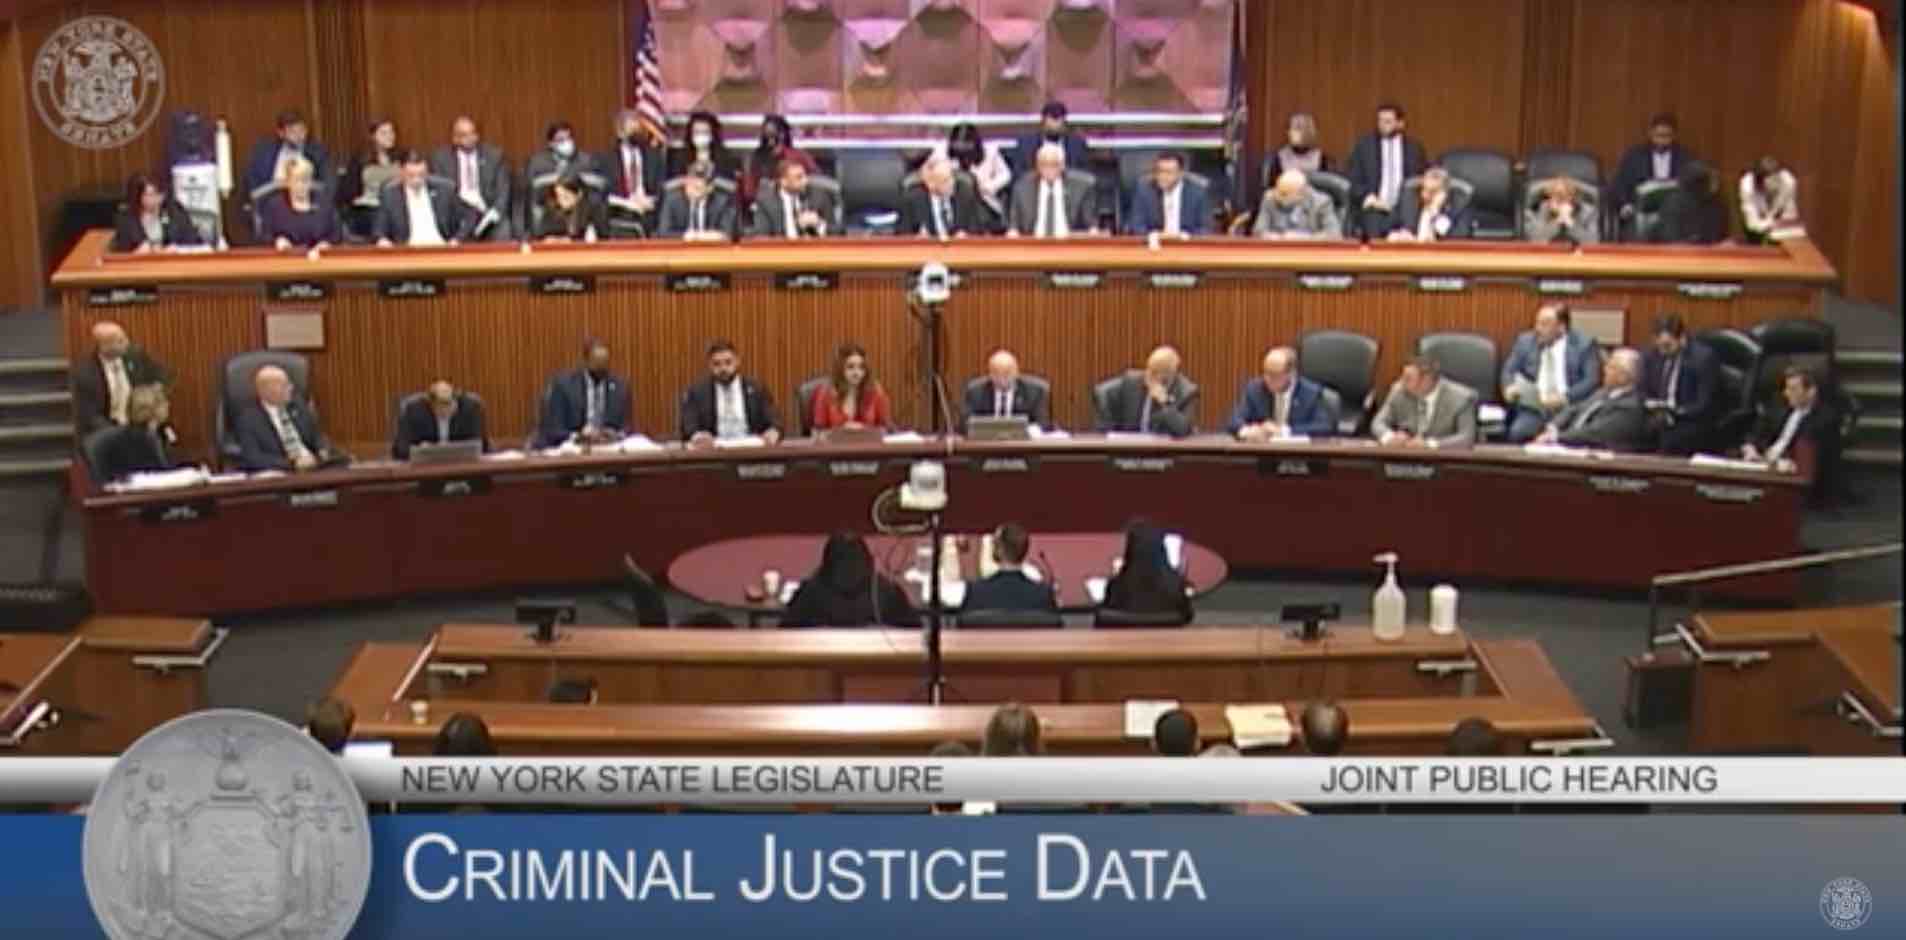 A screenshot of the joint hearing of the NY legislature.